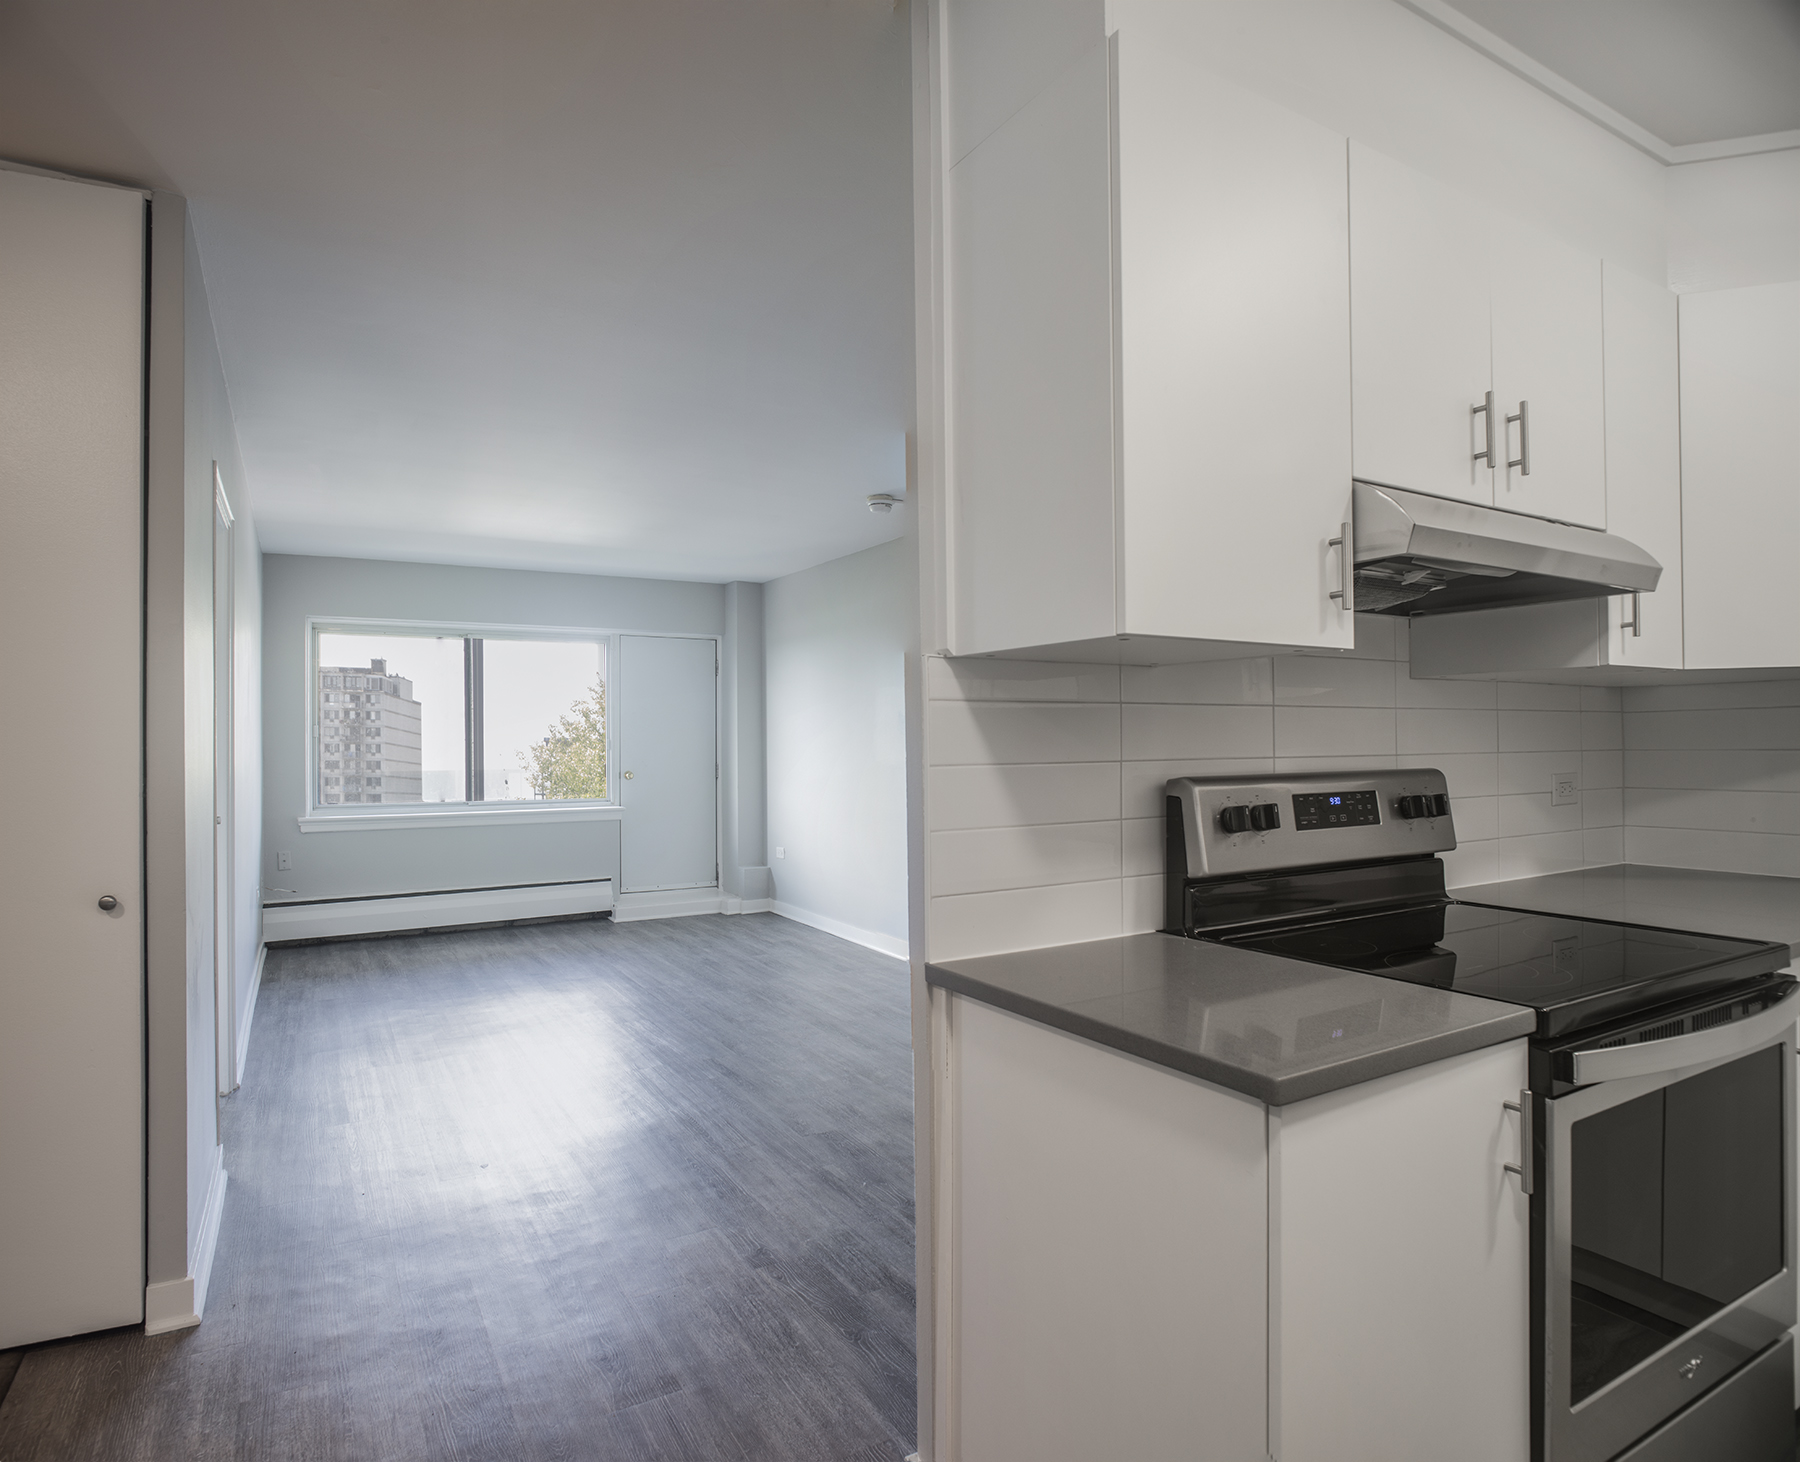 1 bedroom Apartments for rent in Montreal (Downtown) at Le Marco Appartements - Photo 06 - RentersPages – L401545